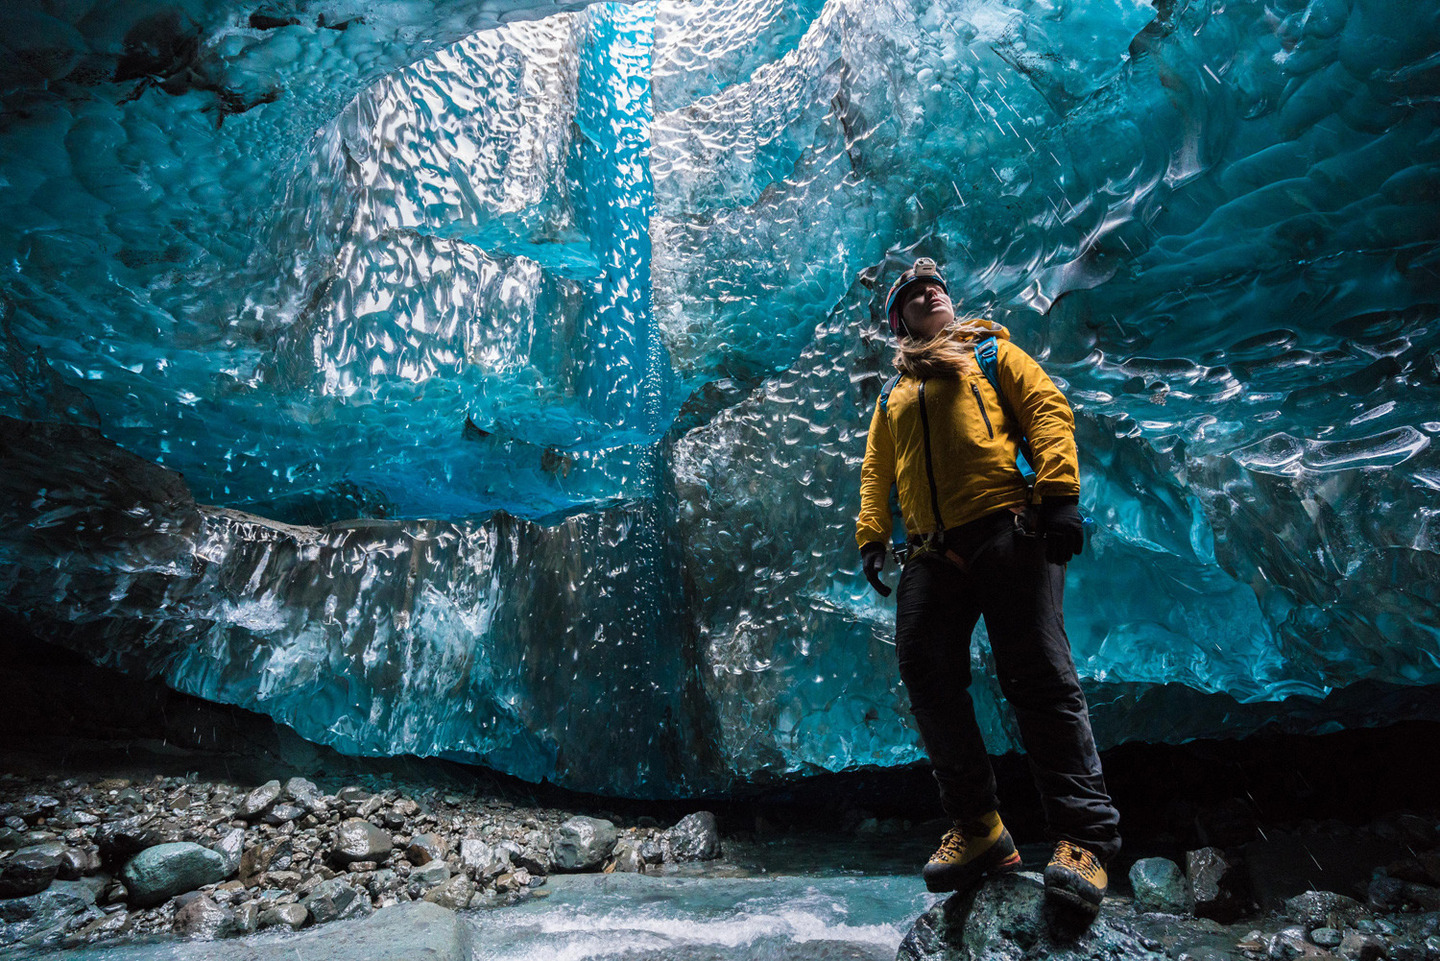 EMBARGOED FOR USE ONLINE AND PRINT UNTIL 00:01 26/11/15Guide Helen Maria is pictured inside the waterfall cave Photographer explores Vatnaj&ouml;kull glacie using Sony's back-illuminated full-frame sensor, Iceland - 25 Nov 2015 *Full story: http://www.rexfeatures.com/nanolink/rm22 Photographer Mikael Buck with assistance from renowned local Icelandic guide Einar Runar Sigurdsson, explored the frozen world of Vatnaj&ouml;kull glacier in Iceland using Sony's world first back-illuminated full-frame sensor, which features in the 7R II camera. His images were taken without use of a tripod or any image stitching techniques in photoshop. This was made possible through Sony's new sensor technology, allowing incredibly detailed low-light hand held photography. Previously images this detailed would have required carrying bulky equipment to the caves, some of which can require hiking and climbing over a glacier for up to two hours to to access. The images were taken without the use of any external sources - just the natural light that filters through the ice caves.  (Rex Features via AP Images)